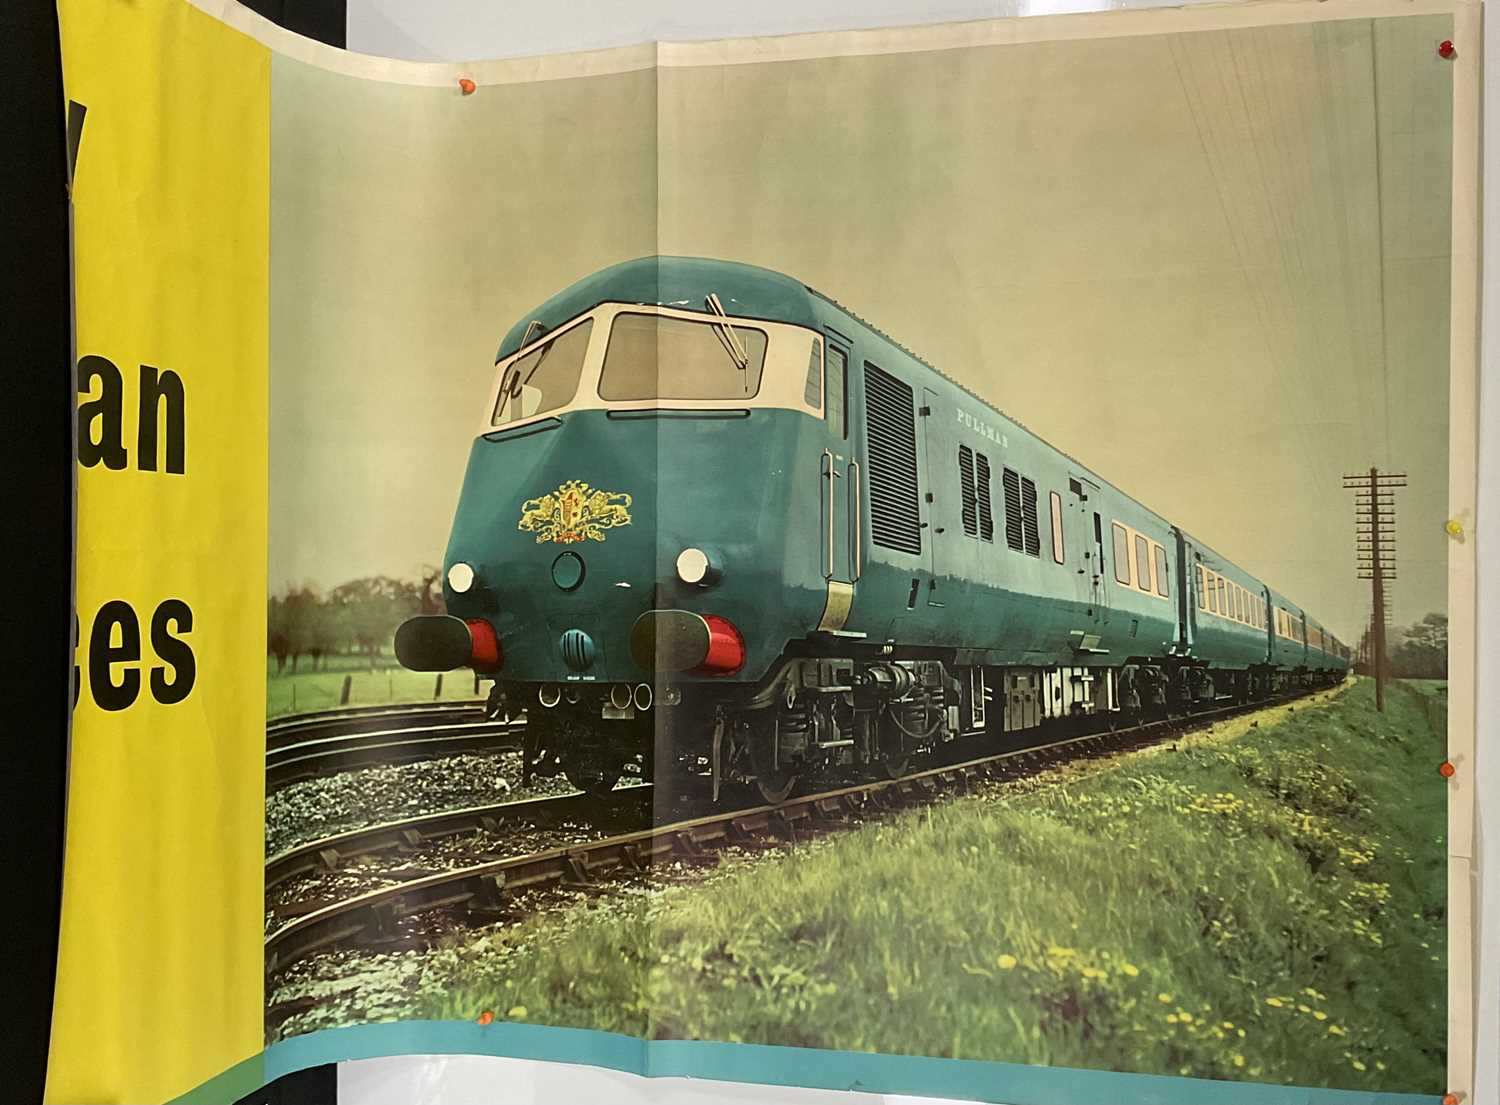 RAILWAYANA - A 60" x 40" poster featuring a Blue Pullman - The short lived luxury train service than